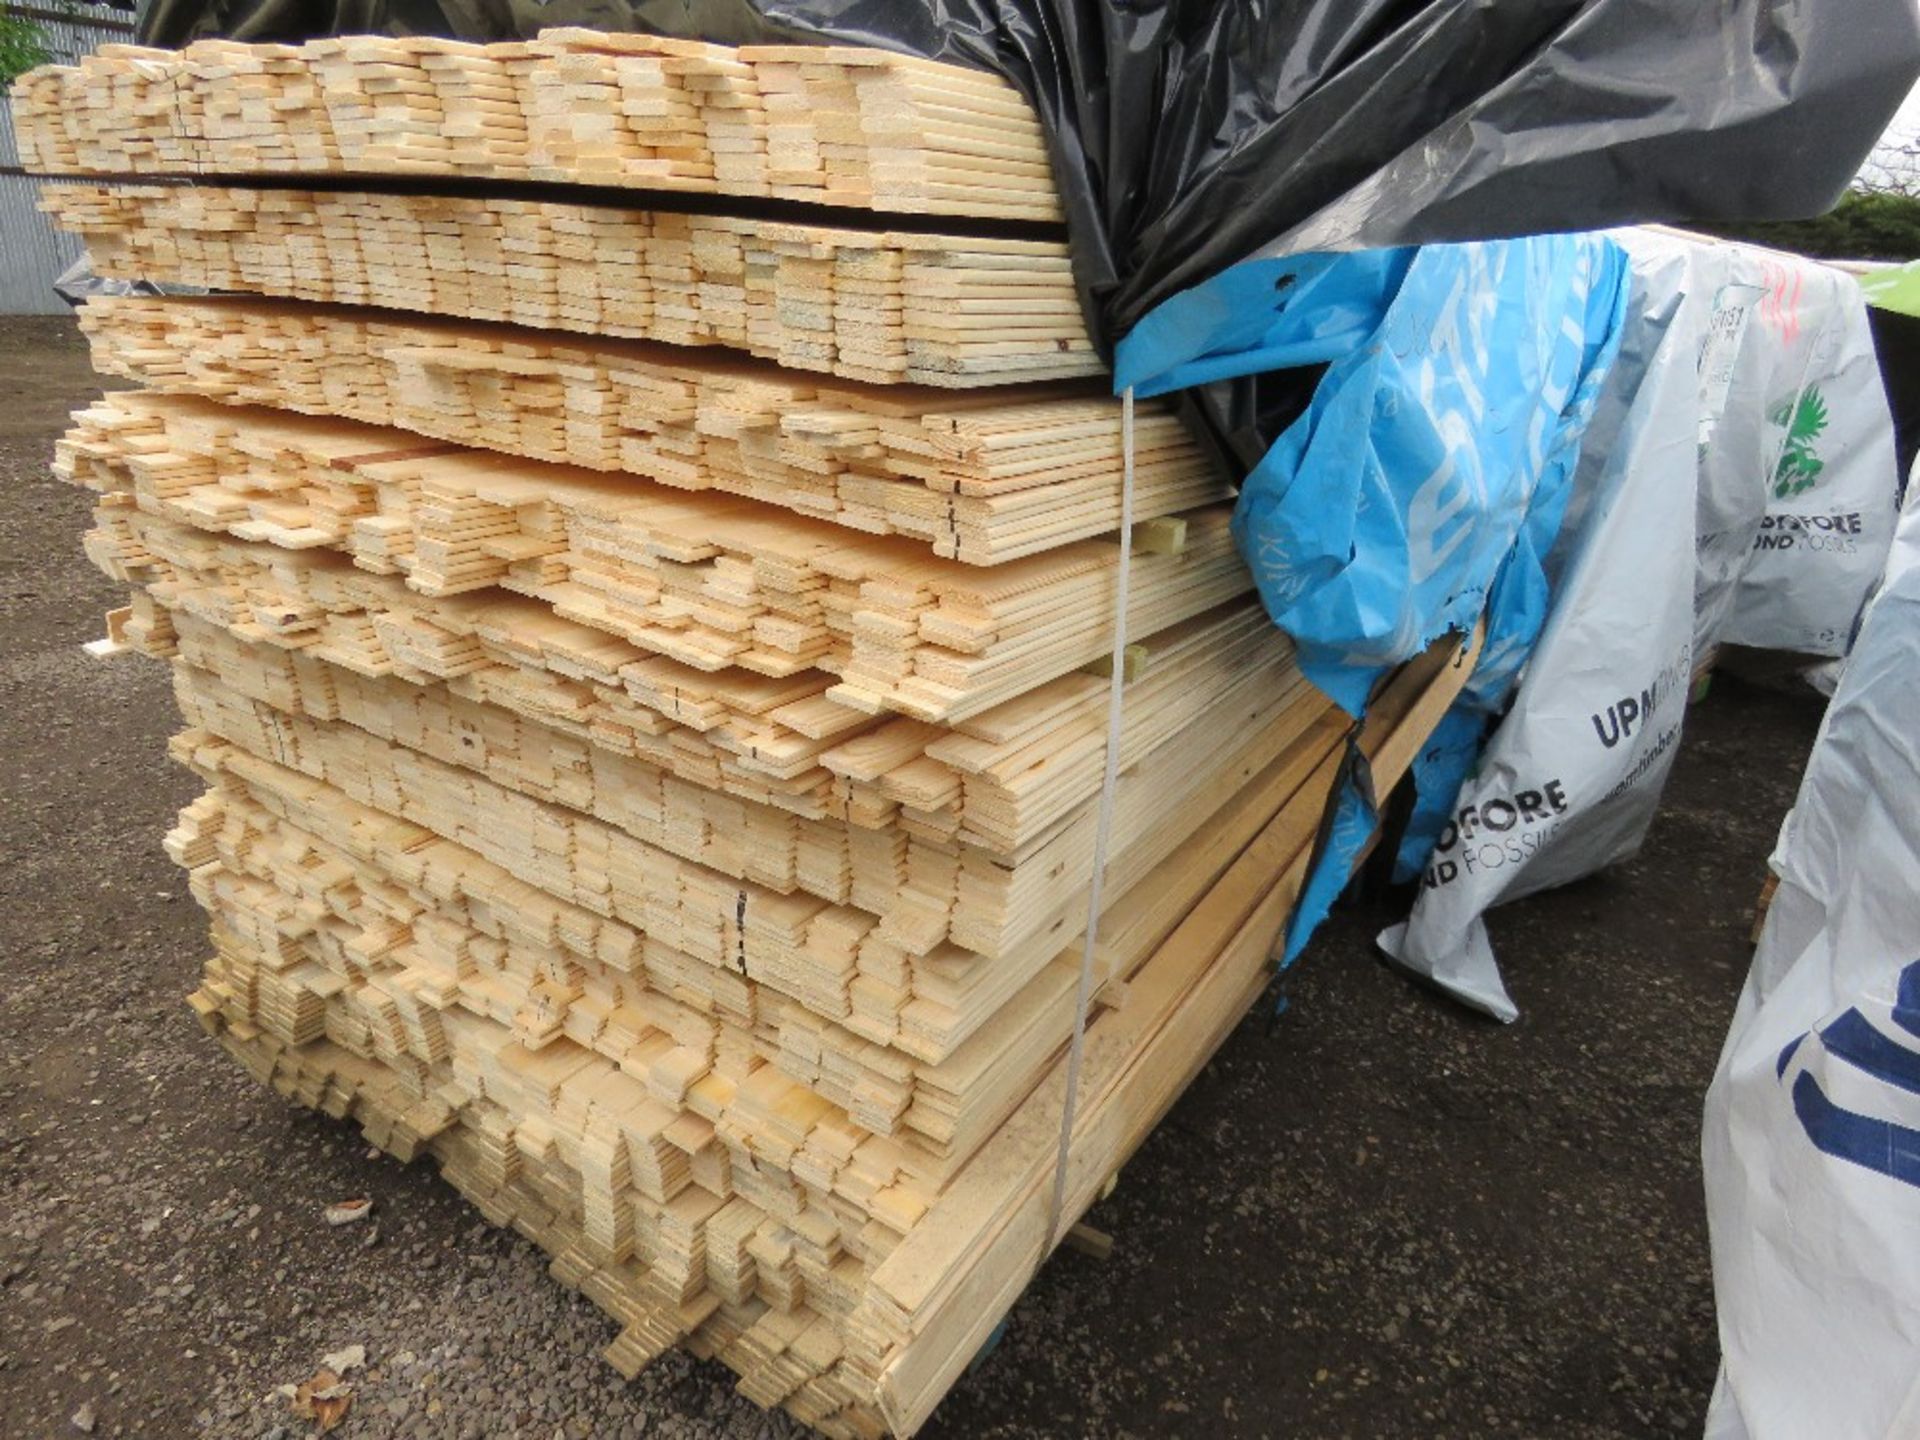 EXTRA LARGE PACK OF UNTREATED WOVEN FENCING TIMBER SLATS 40MM WIDTH X 1.75M LENGTH APPROX. - Image 3 of 3